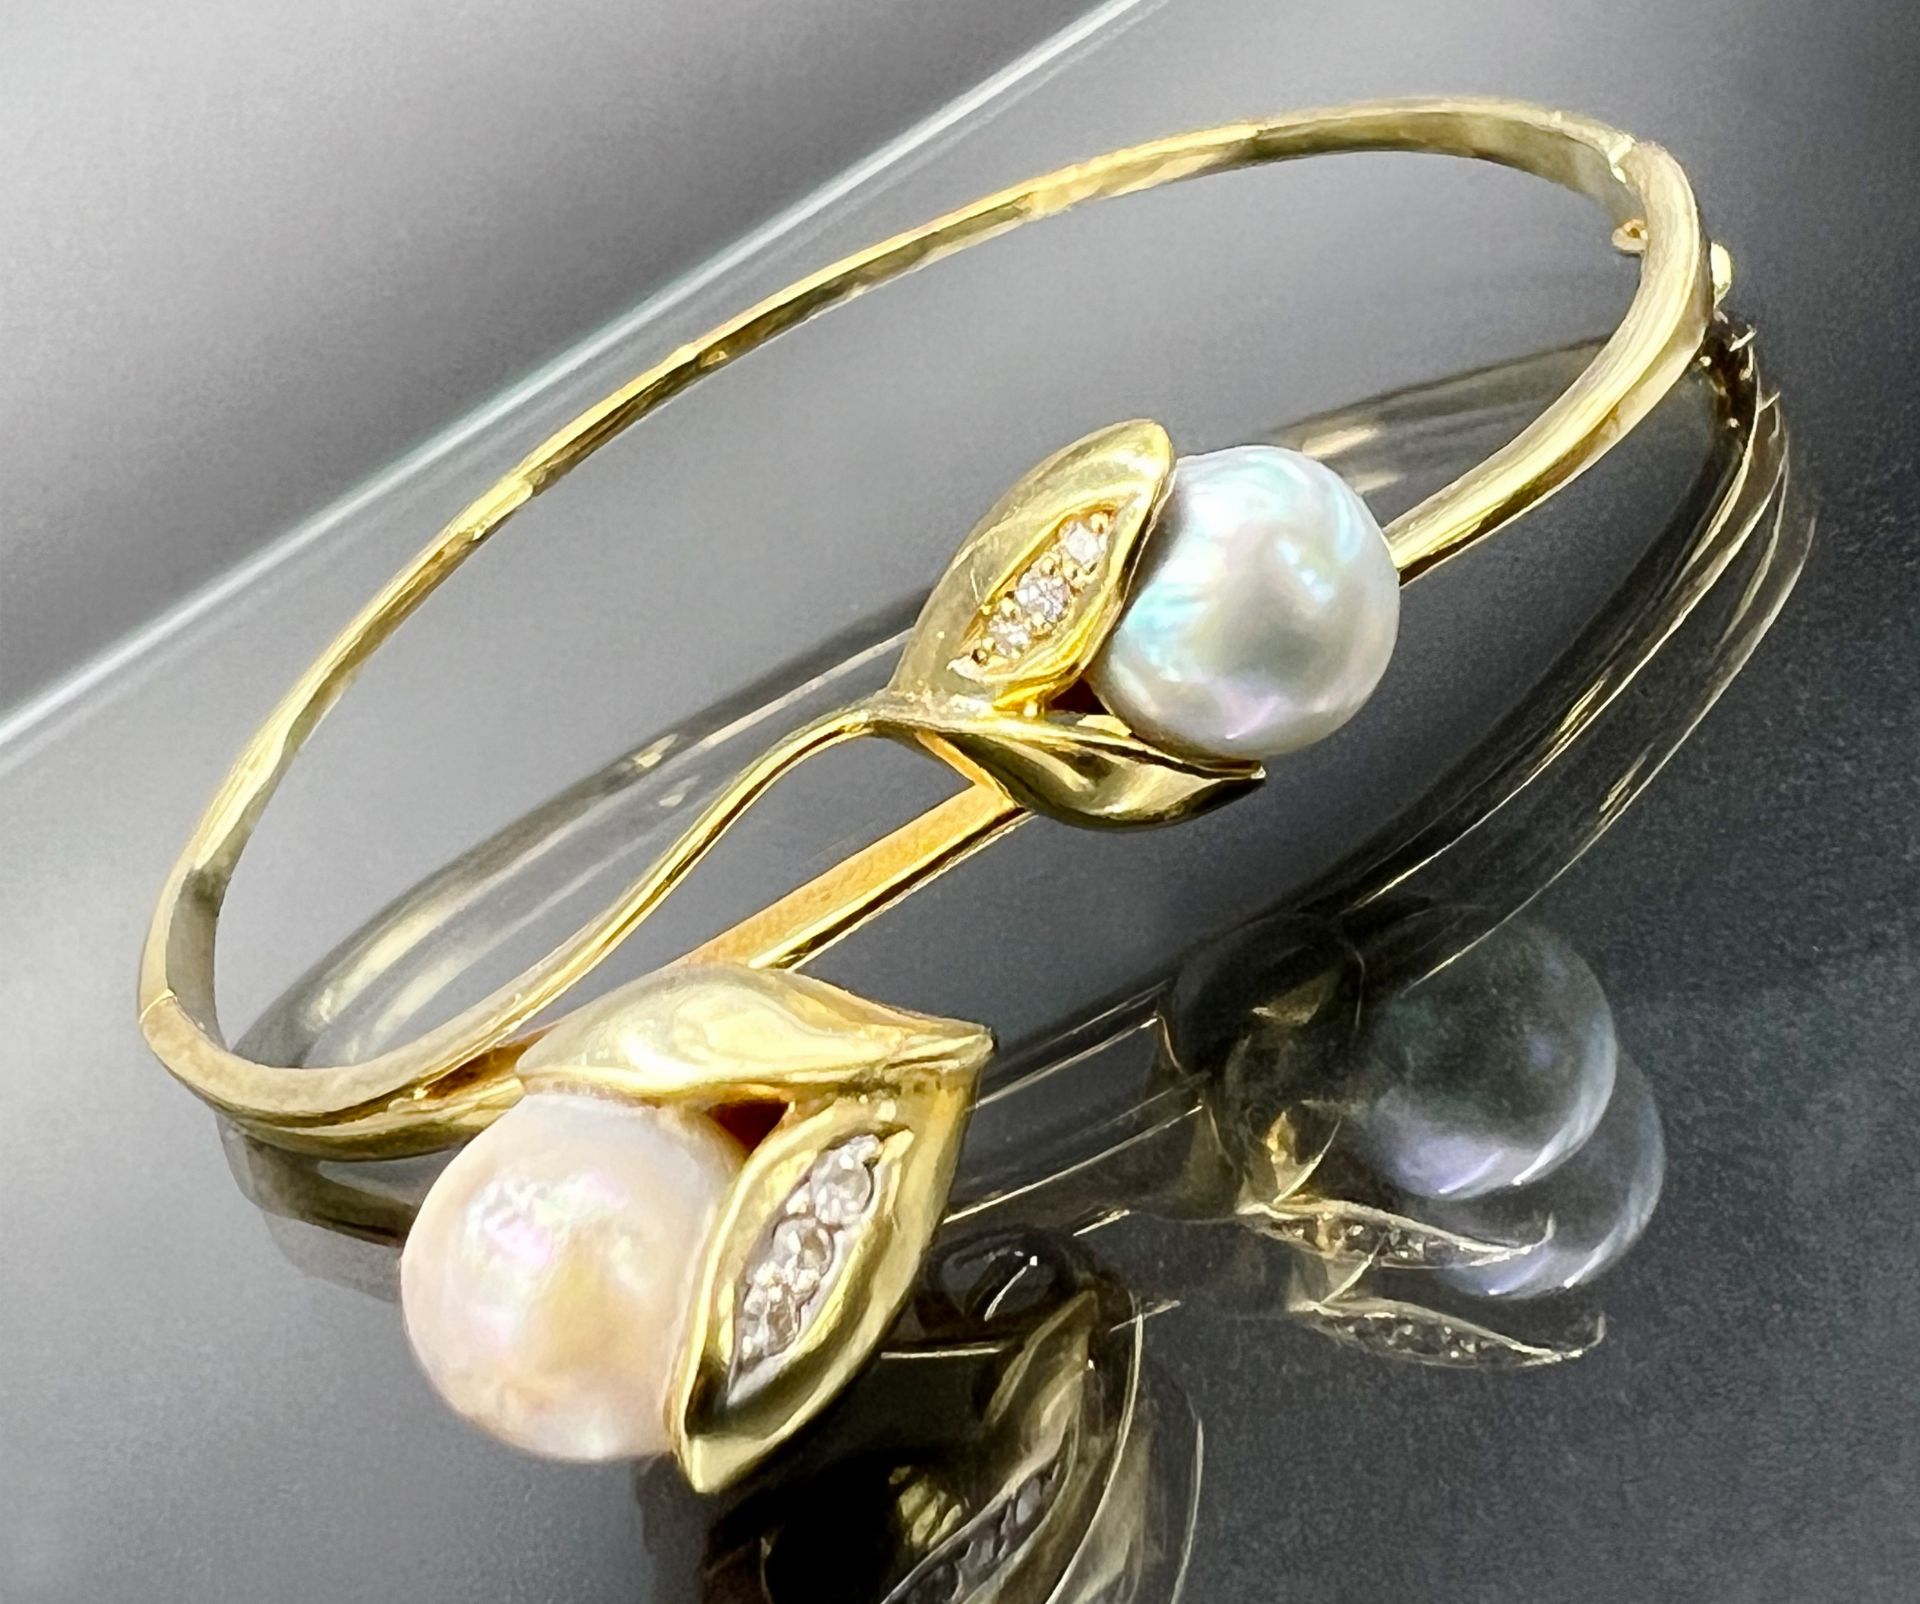 Jewellery set 585 yellow gold. Bangle and pendant with pearls. - Image 3 of 7